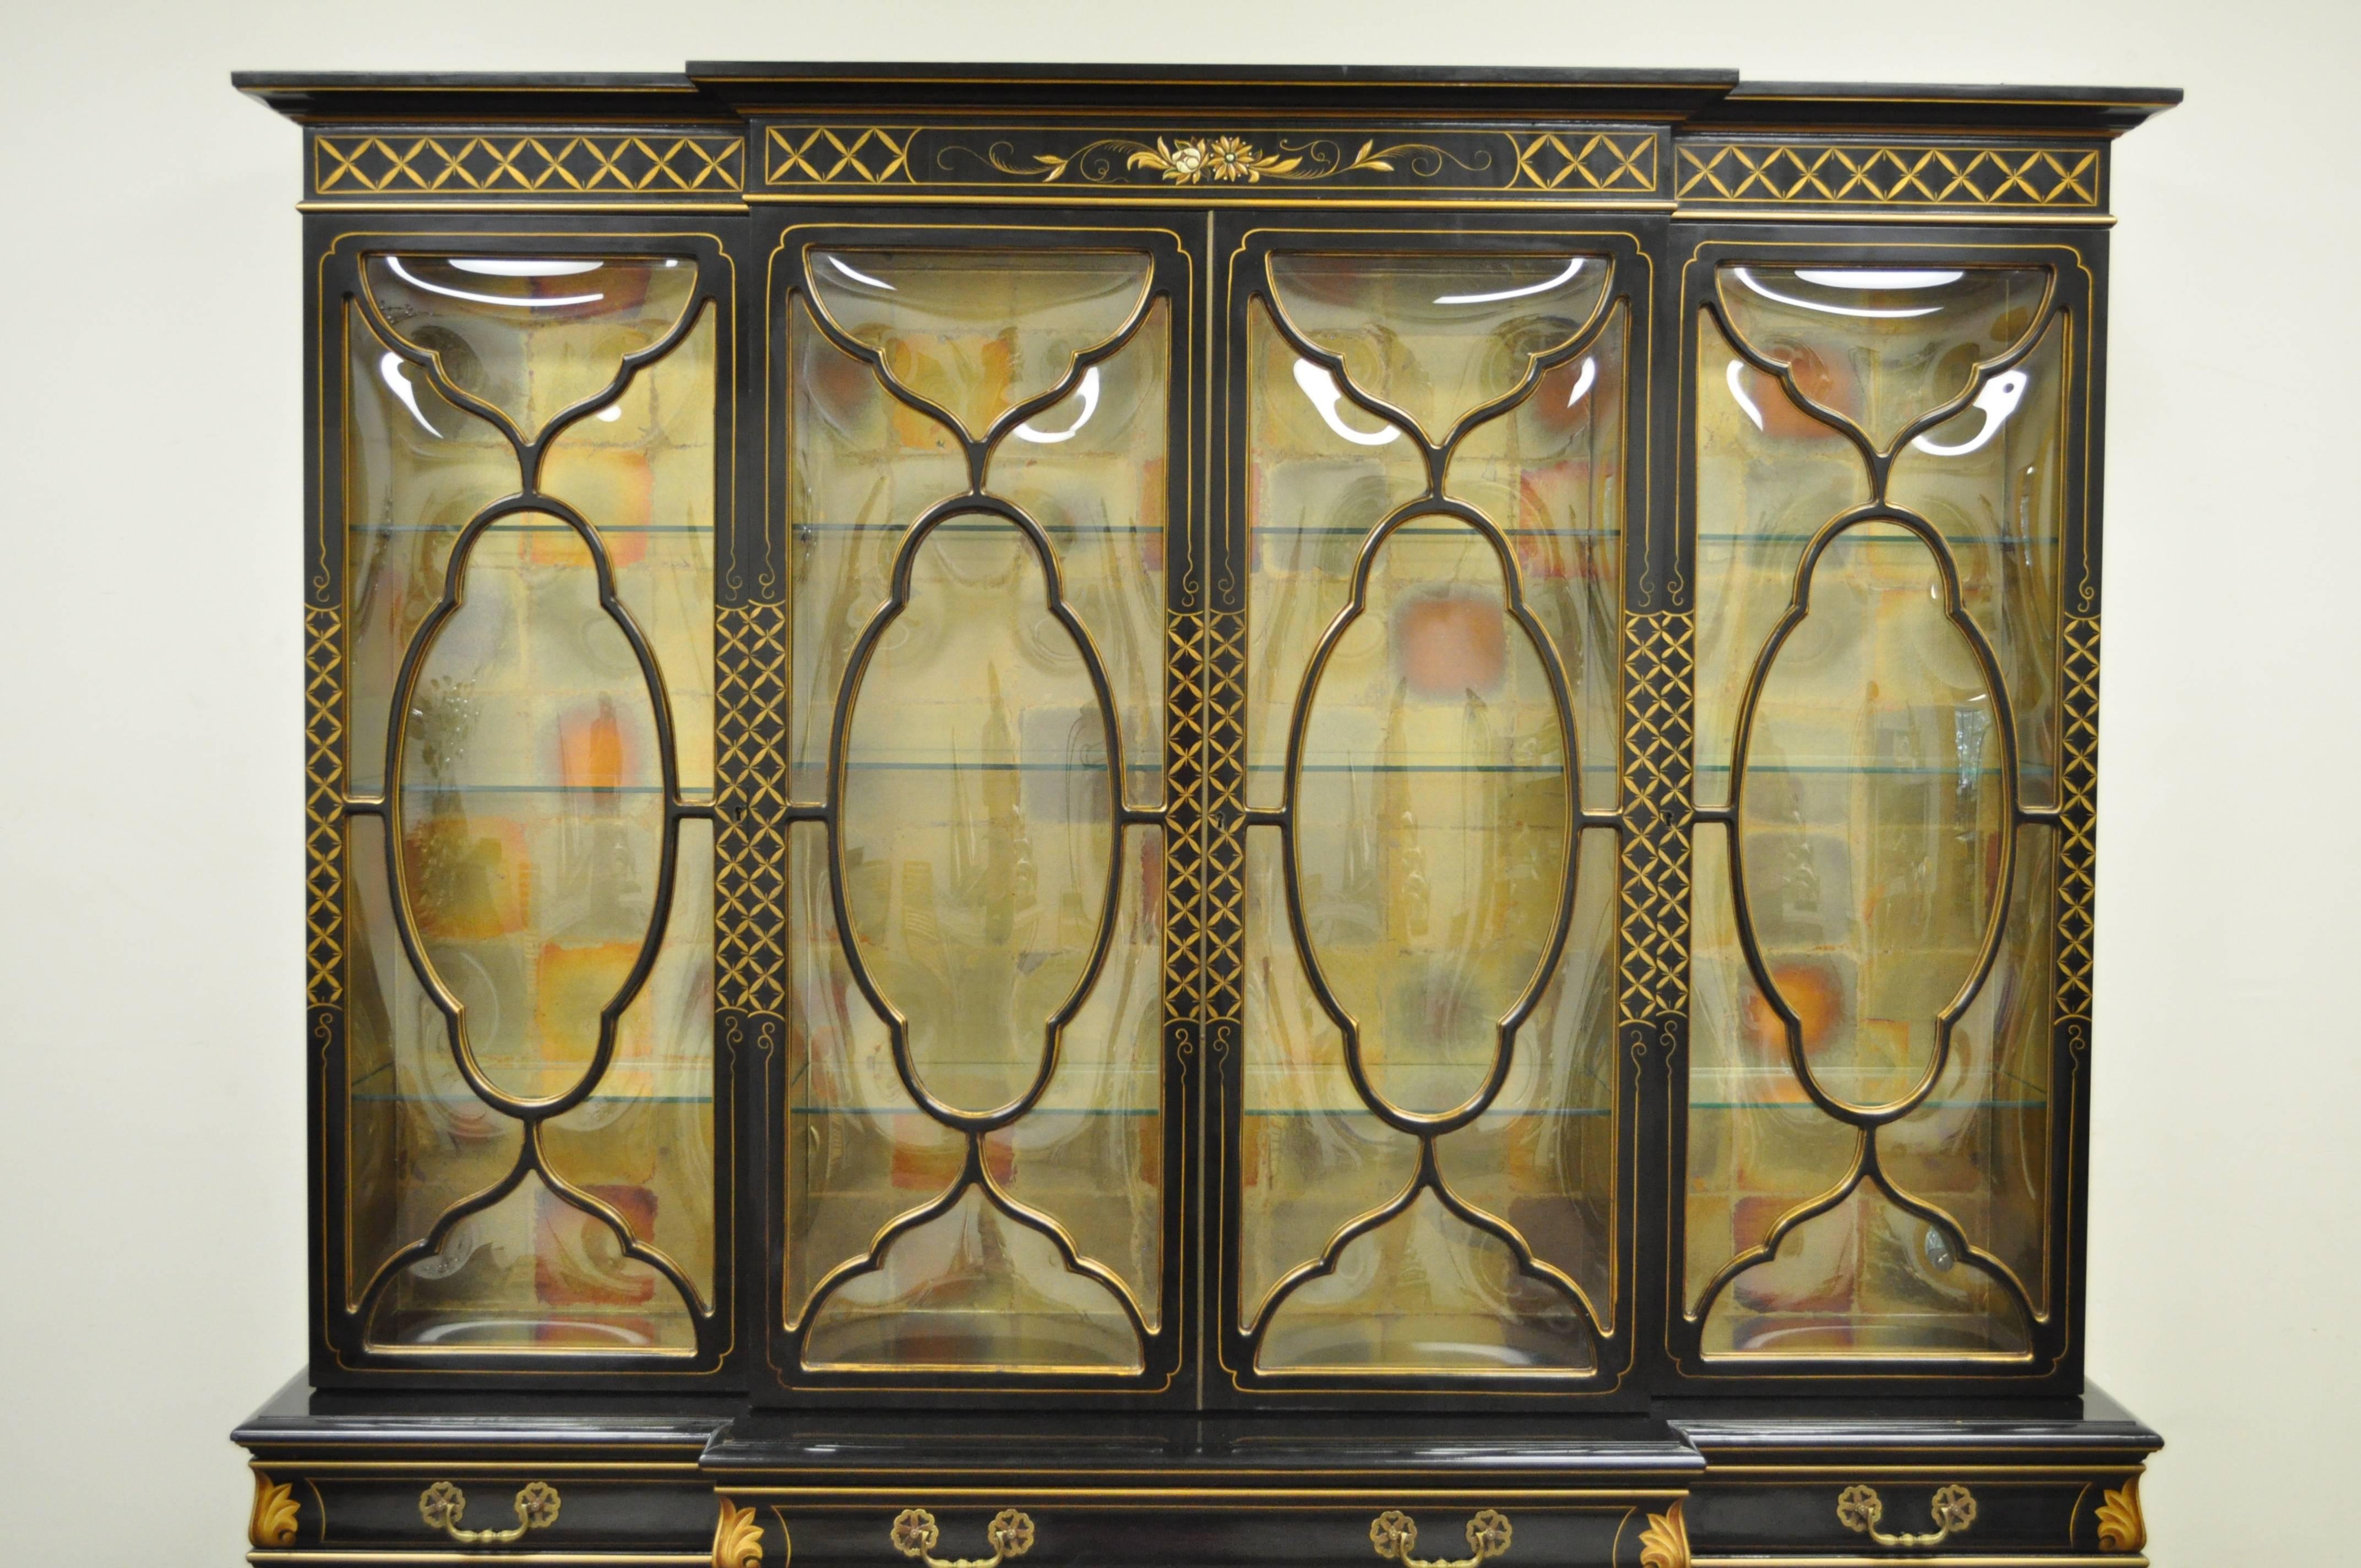 High quality vintage black oriental bubble glass breakfront with drop front leather top desk by Karges. This stately two part cabinet features bubble glass, hand-painted oriental scenes, drop front burgundy leather with gold gilt detailing, gold